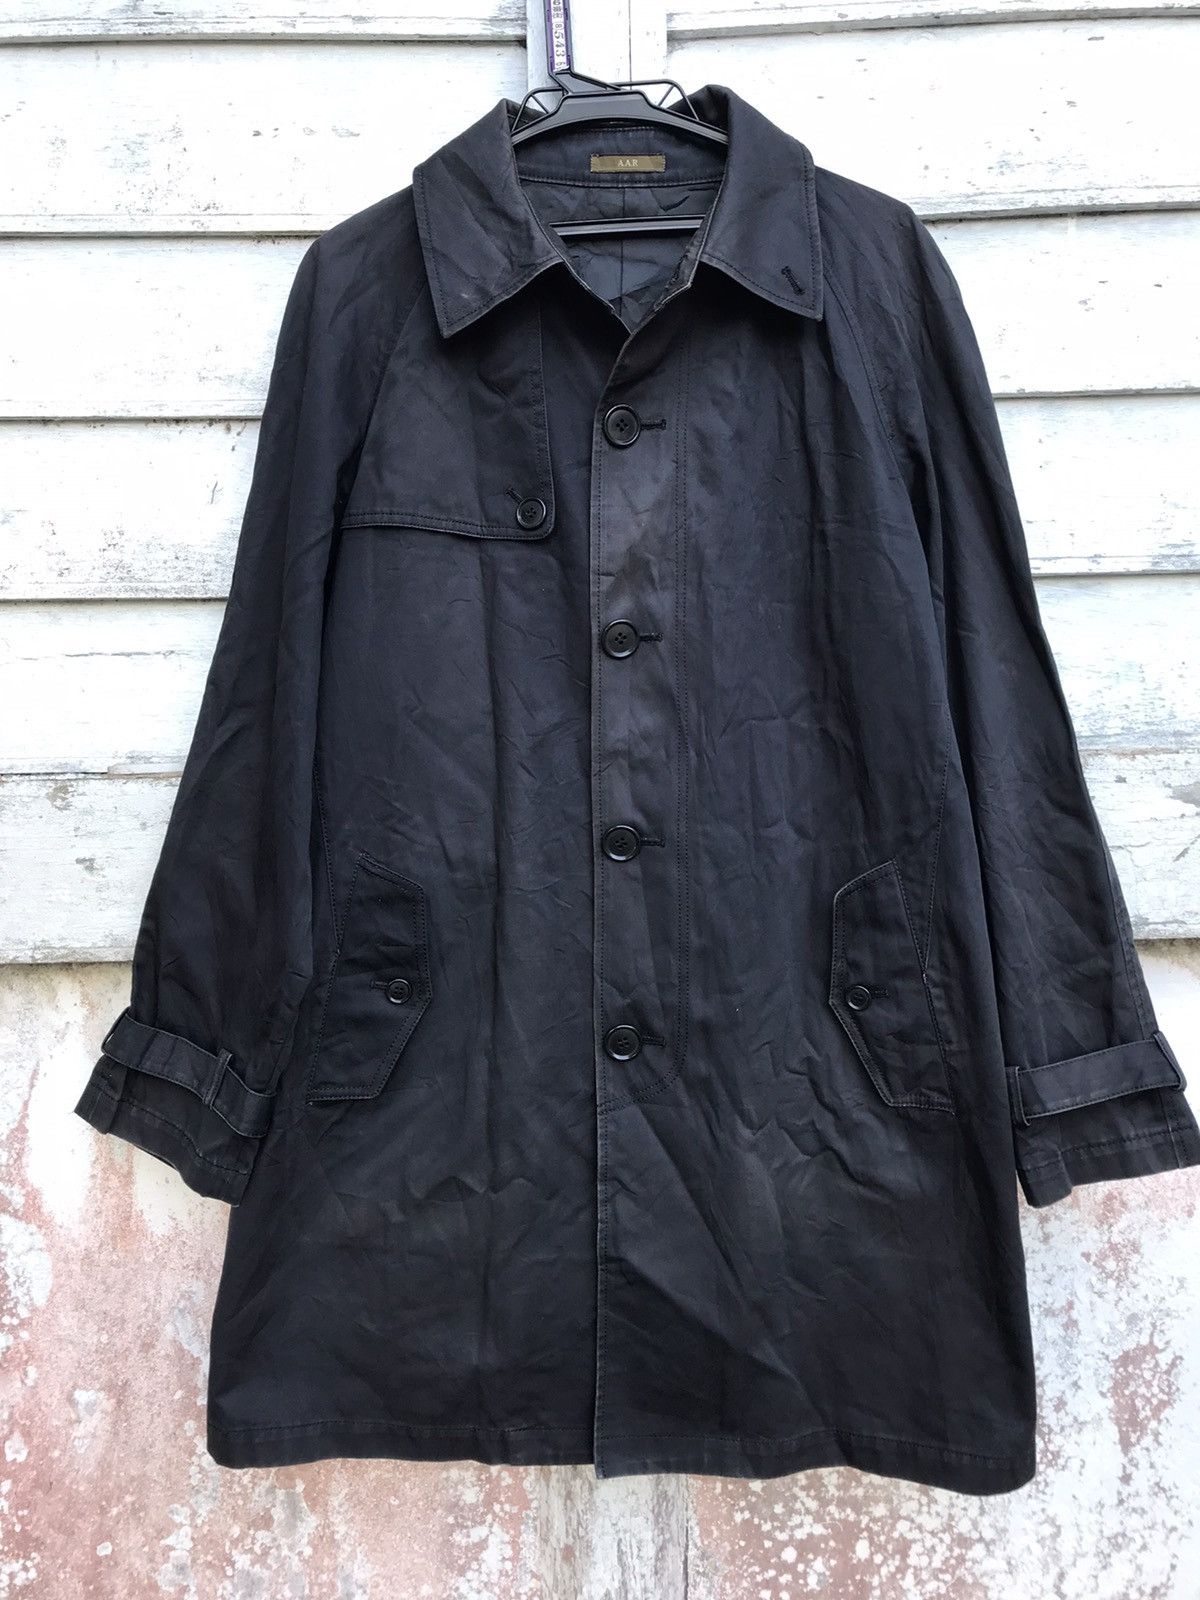 Yohji Yamamoto Against All Risk (A.R.R )Trench Coat - 1